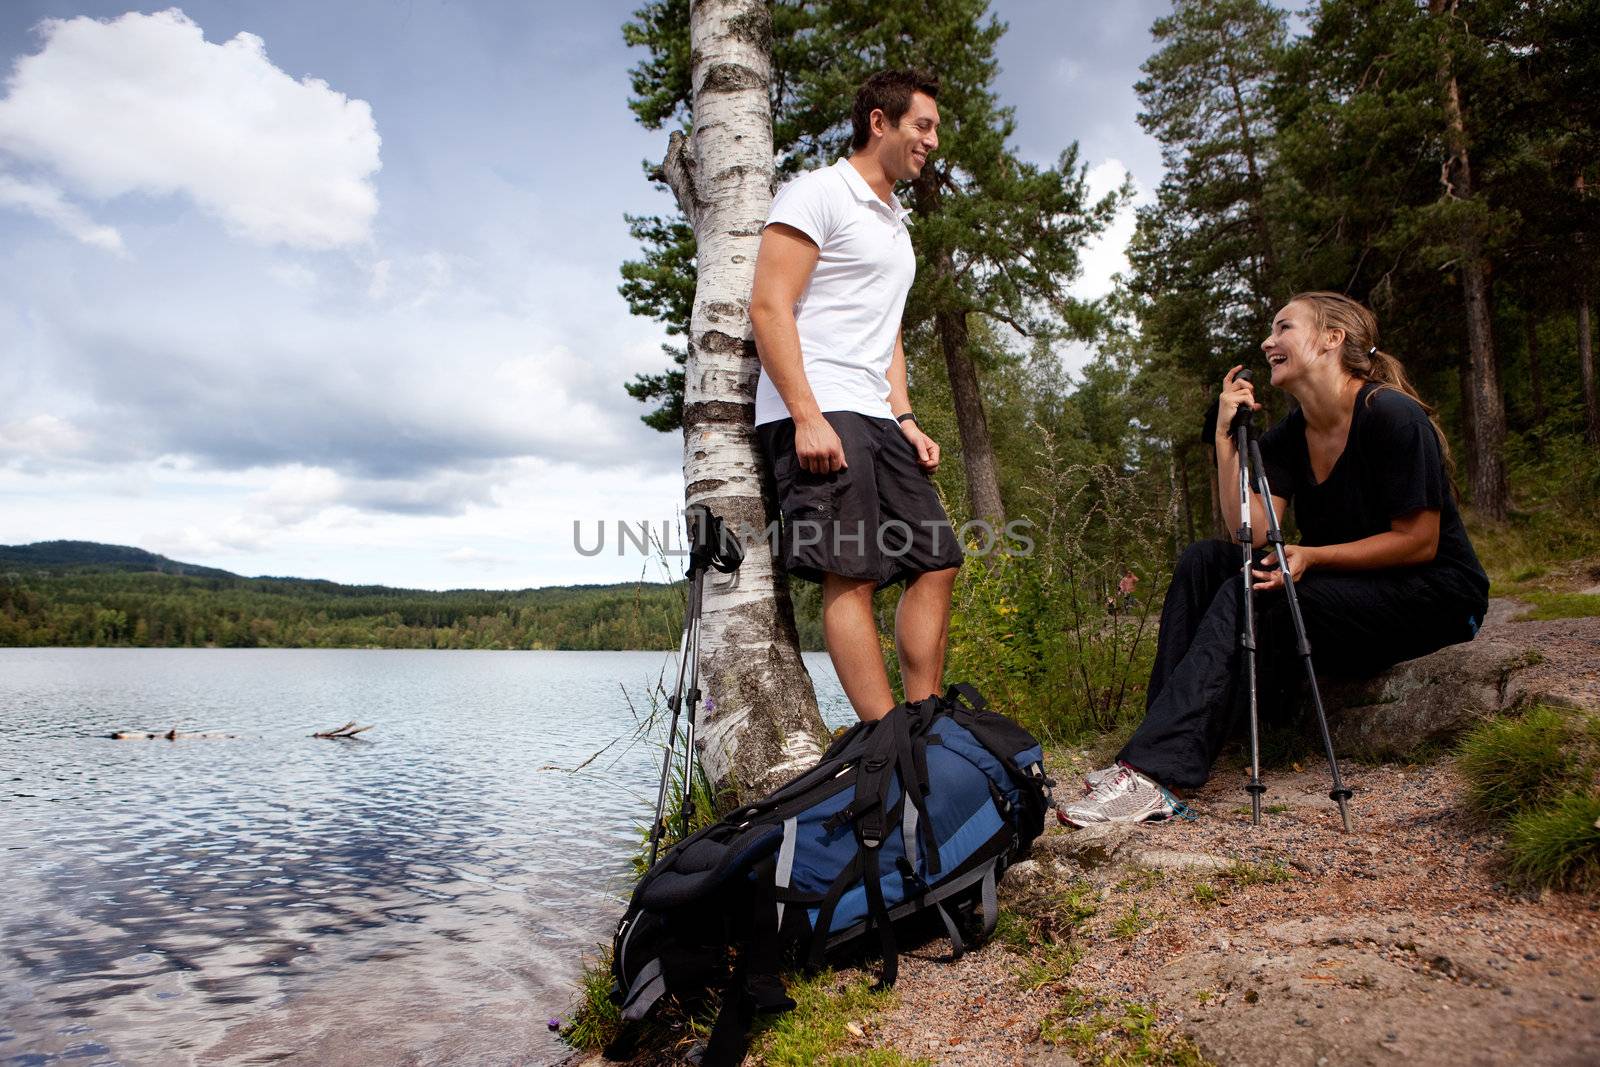 A couple on a camping trip - taking a break by a lake